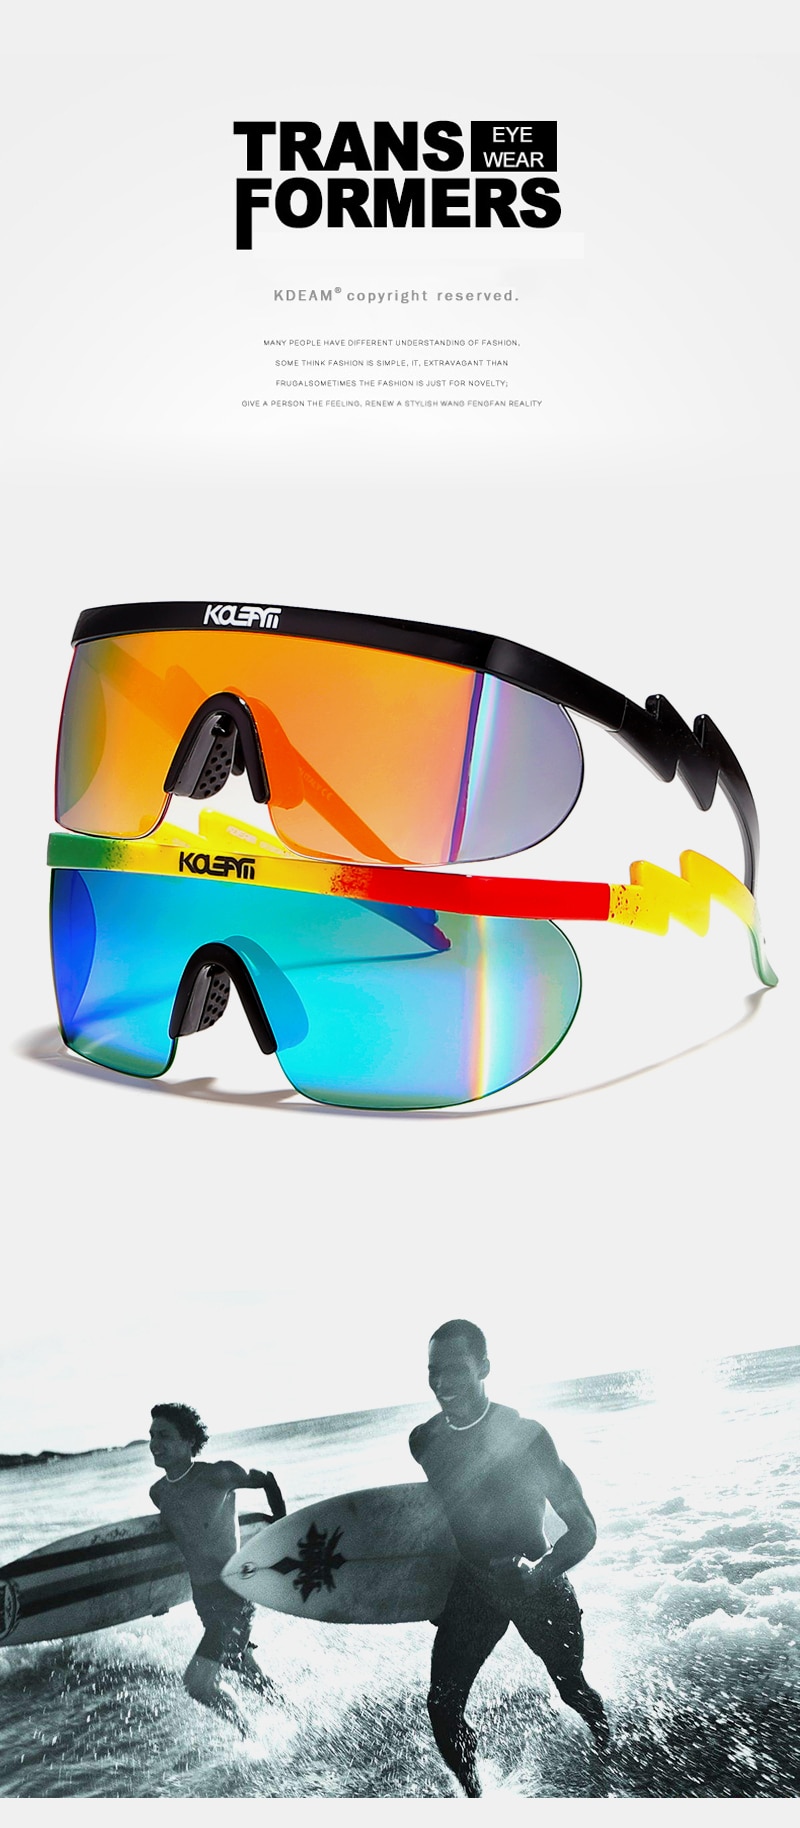 Riff Raff's Oversized. 100% UV Protection. Windproof Sunglasses With Protective Box